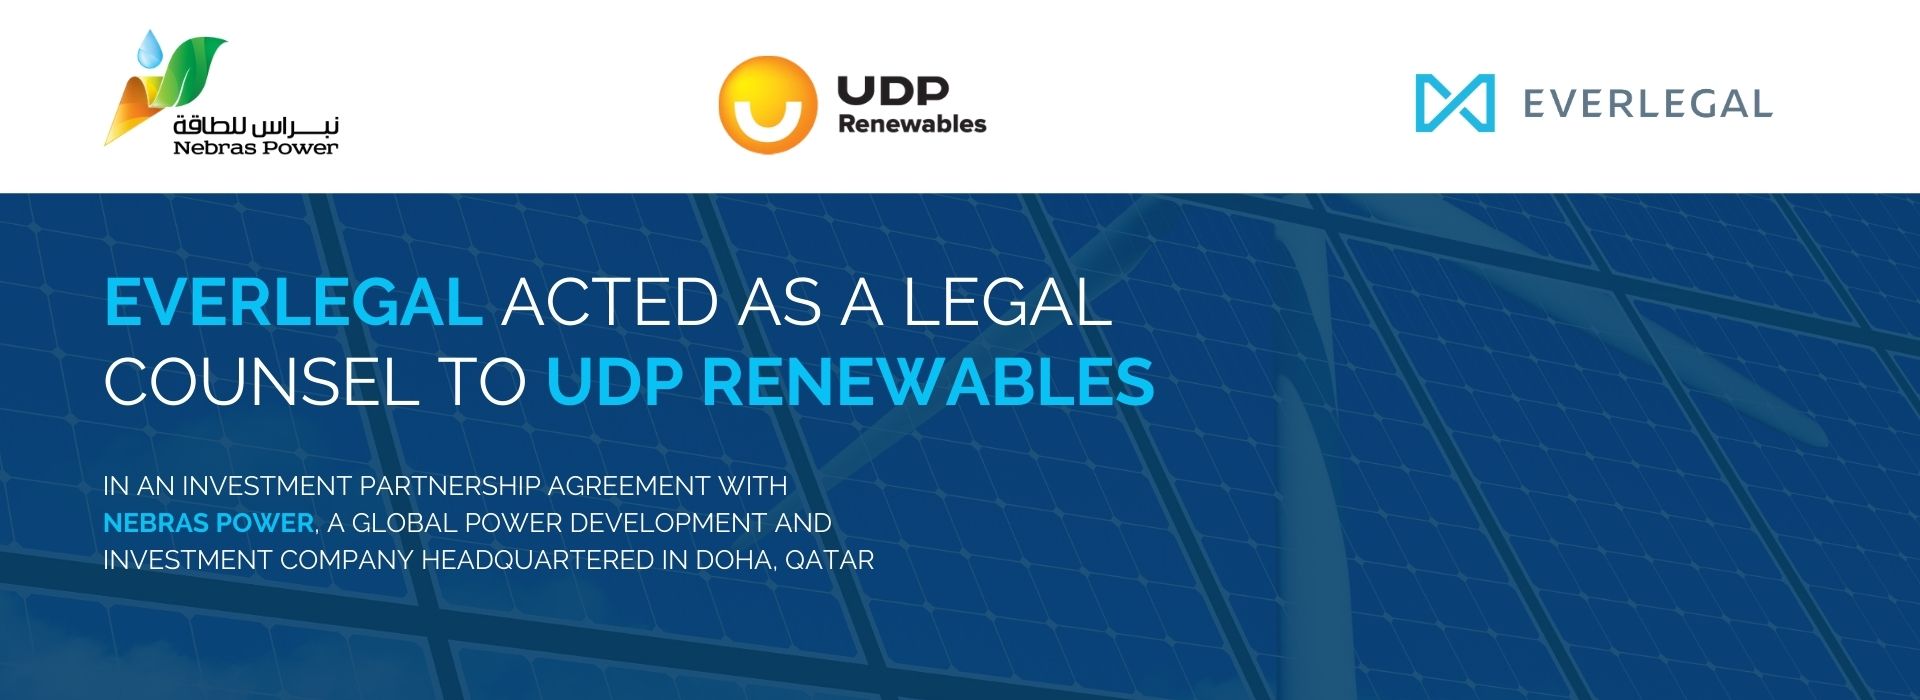 EVERLEGAL Acted as a Legal Counsel to UDP Renewables in an Investment Partnership Agreement with Nebras Power, a Global Power Development and Investment Company Headquartered in Doha, Qatar